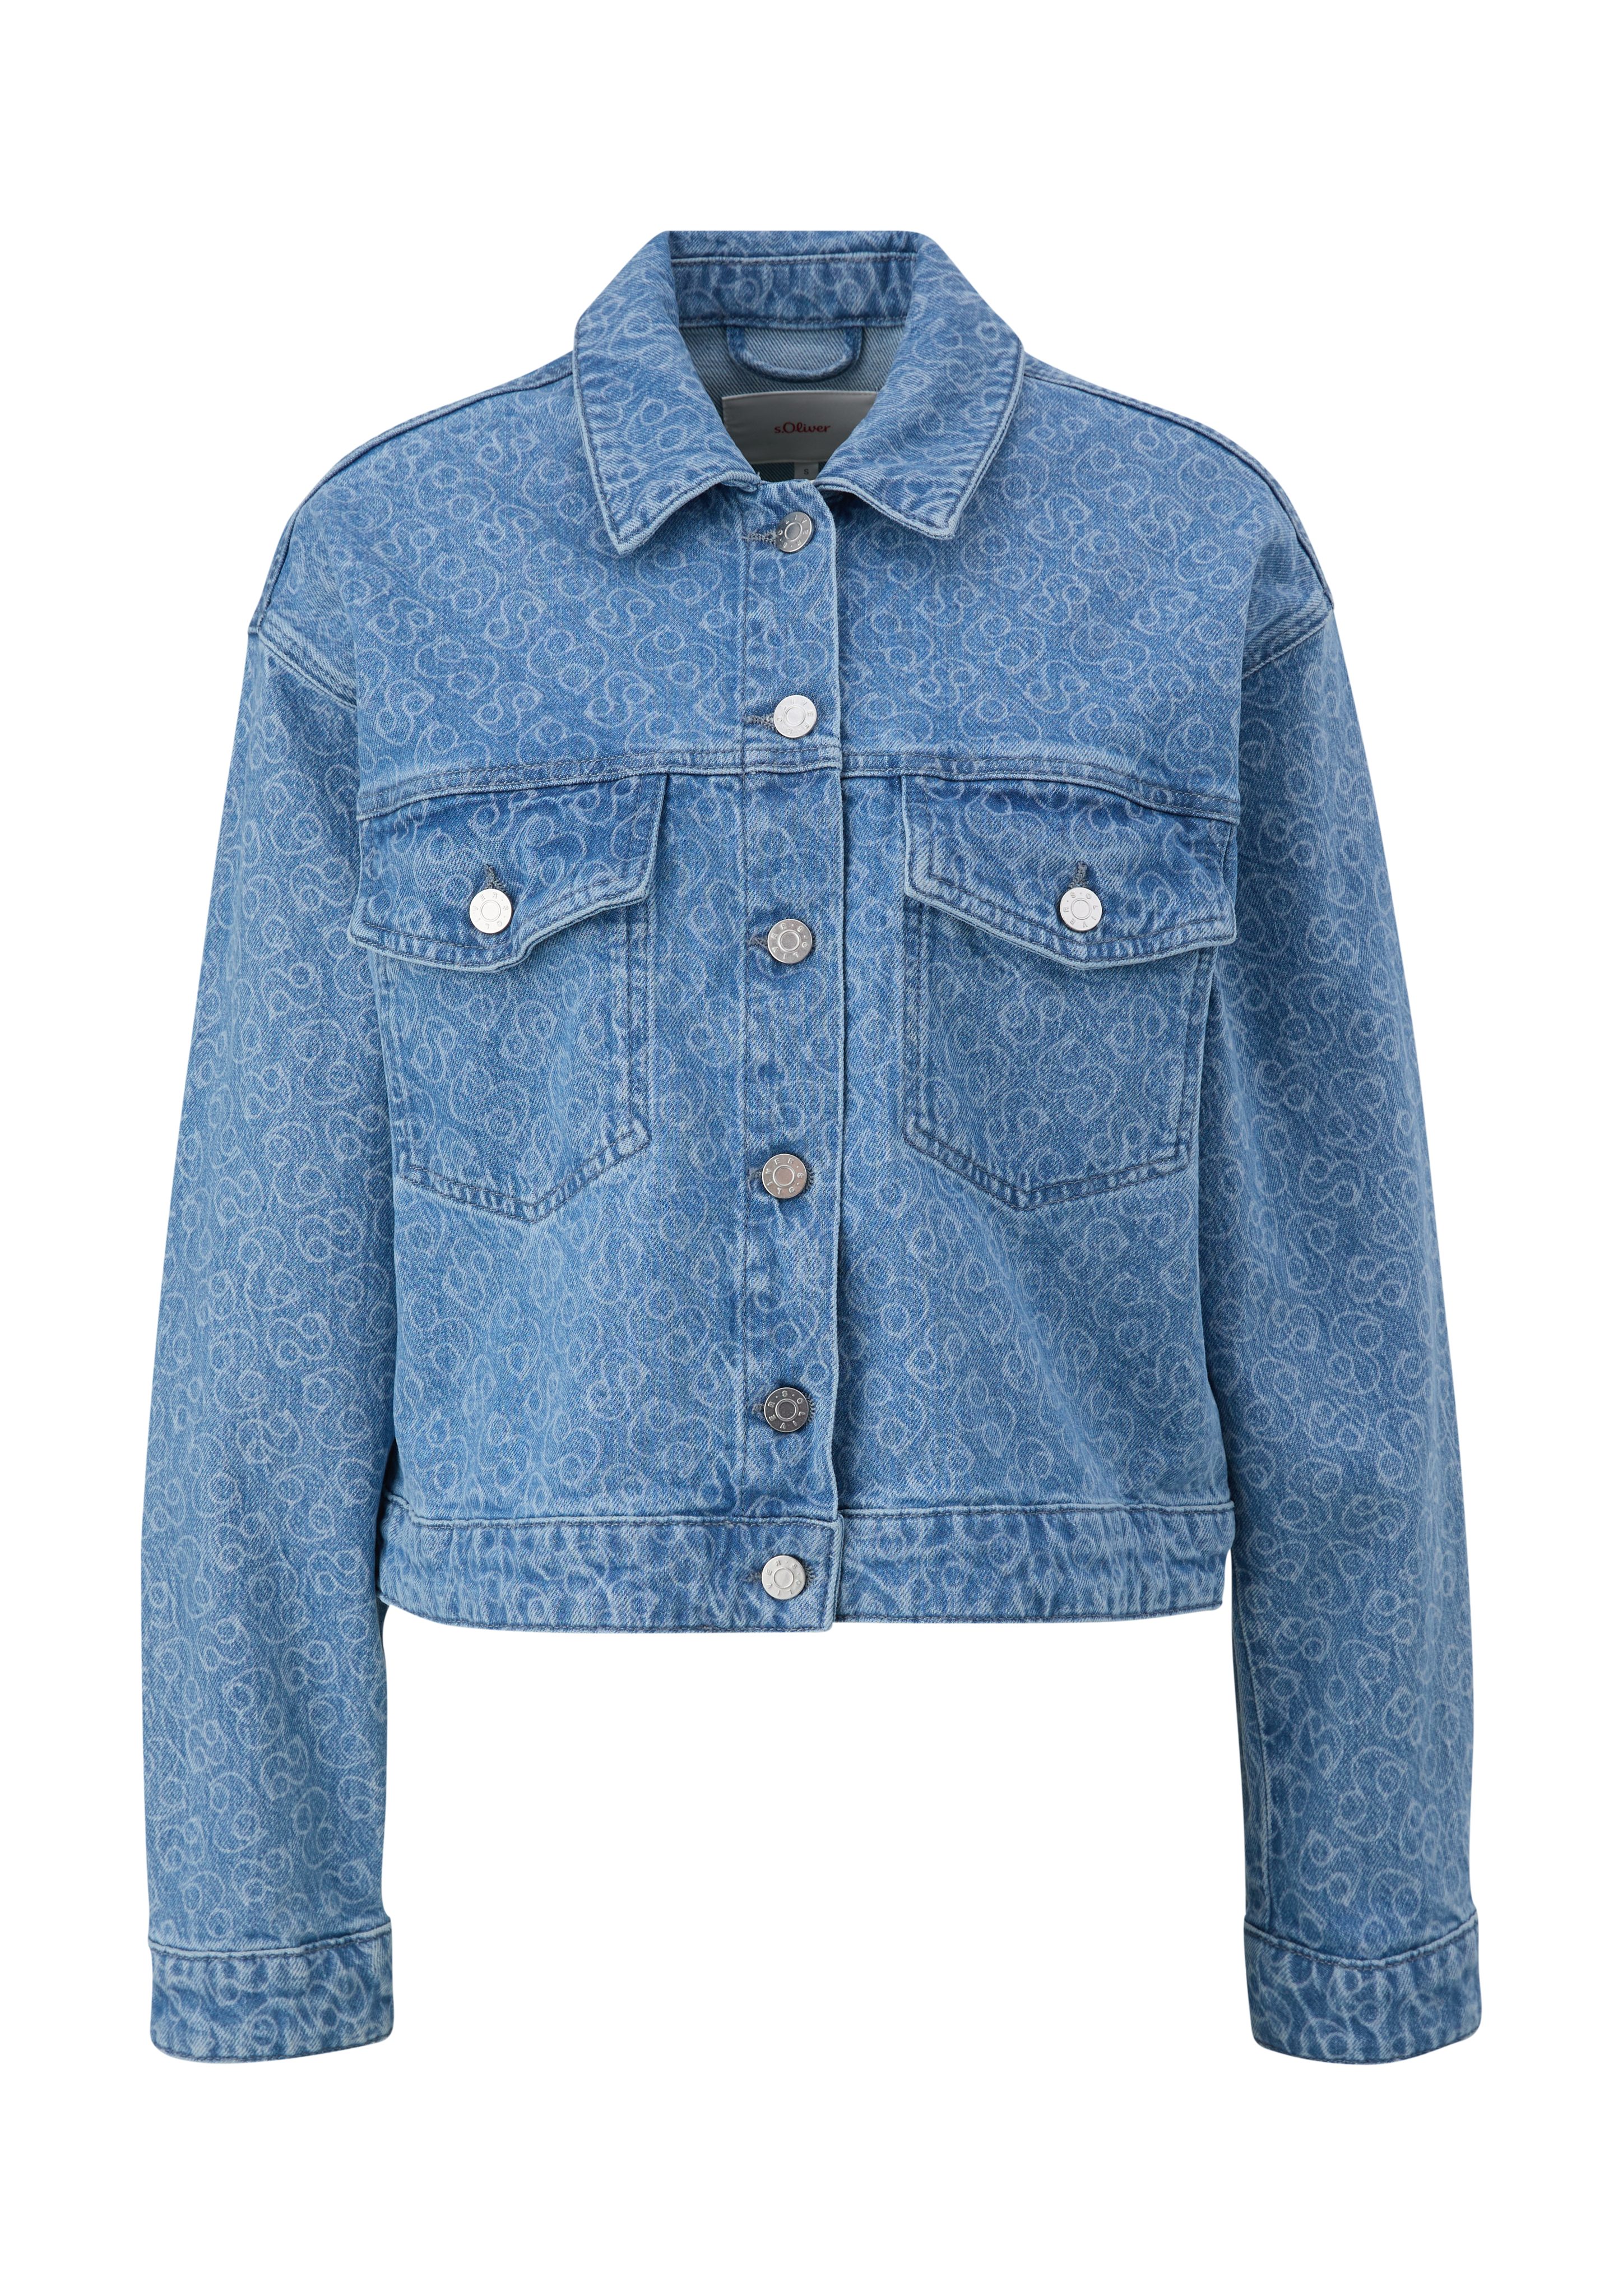 Logo-Muster Waschung mit Funktionsjacke Jeansjacke s.Oliver